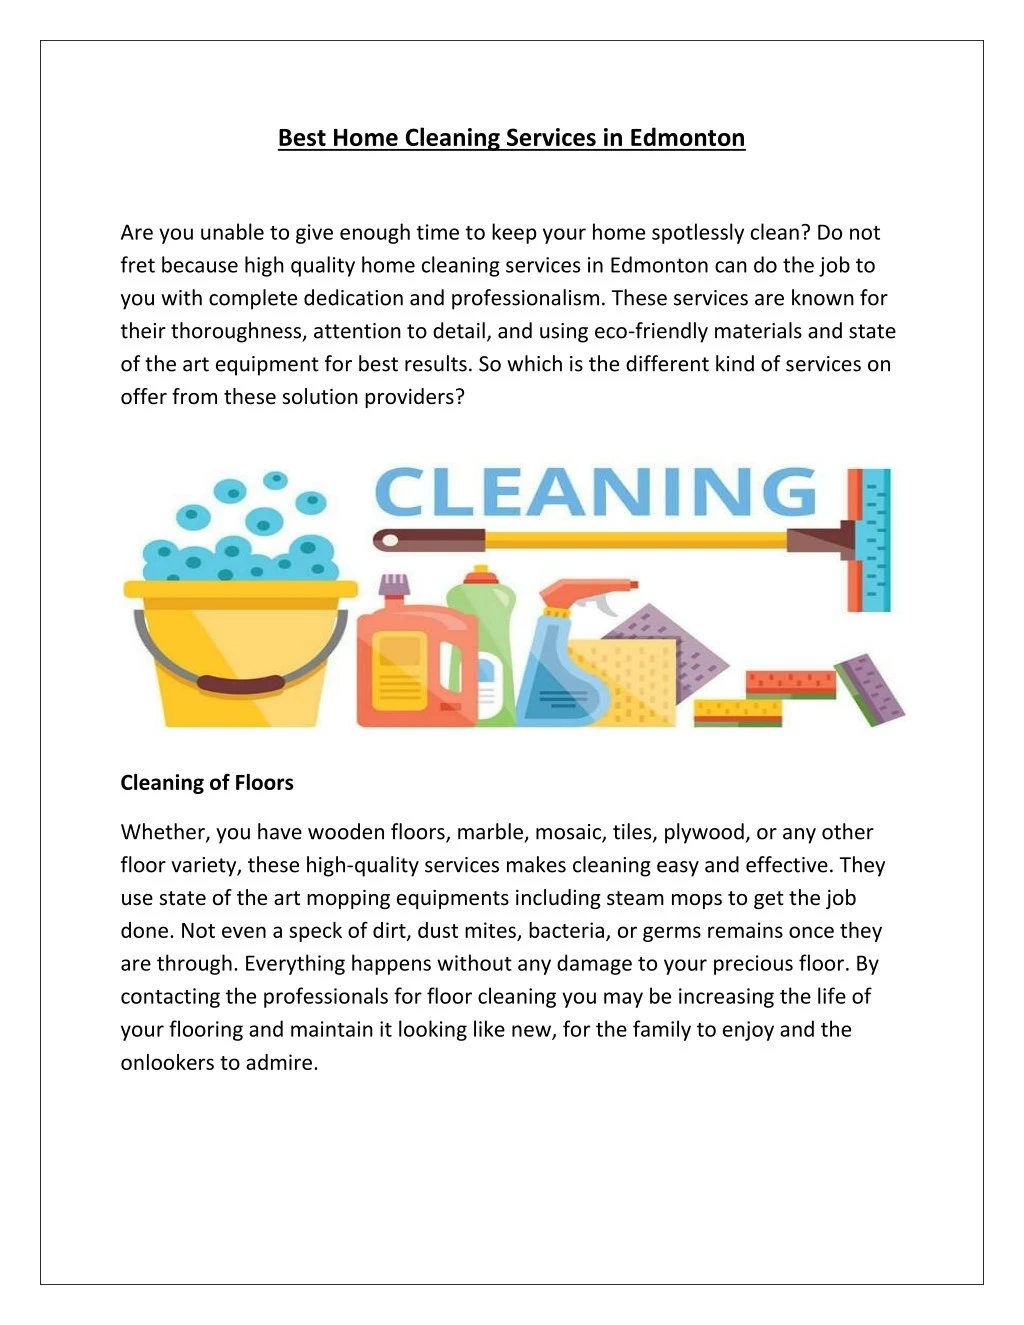 best home cleaning services in edmonton n.